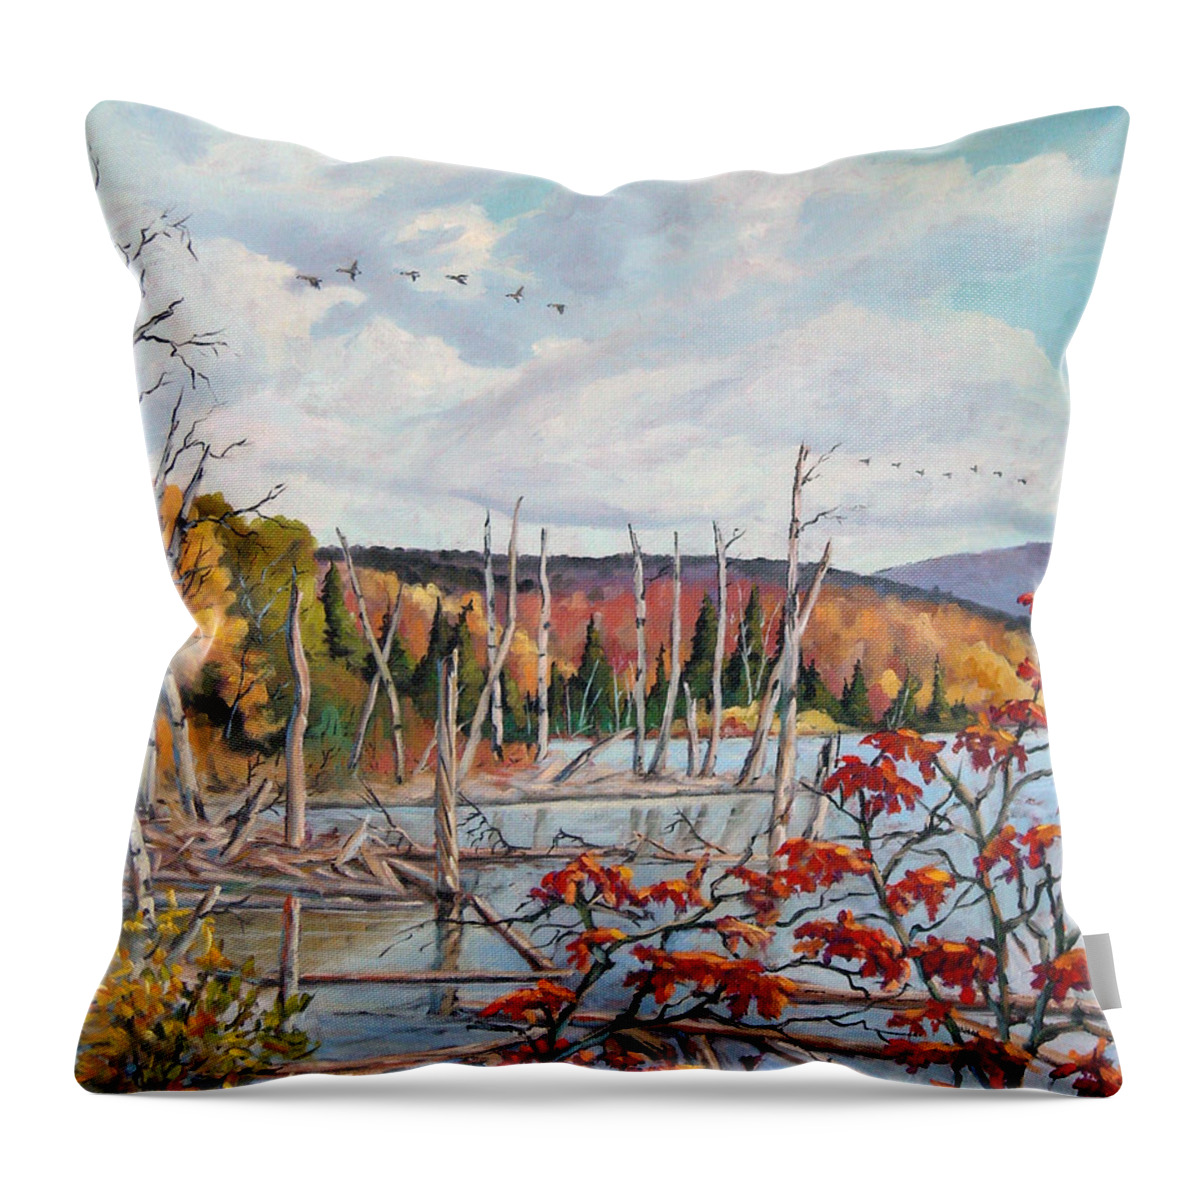 Original Painting Throw Pillow featuring the painting Gone South by Richard T Pranke